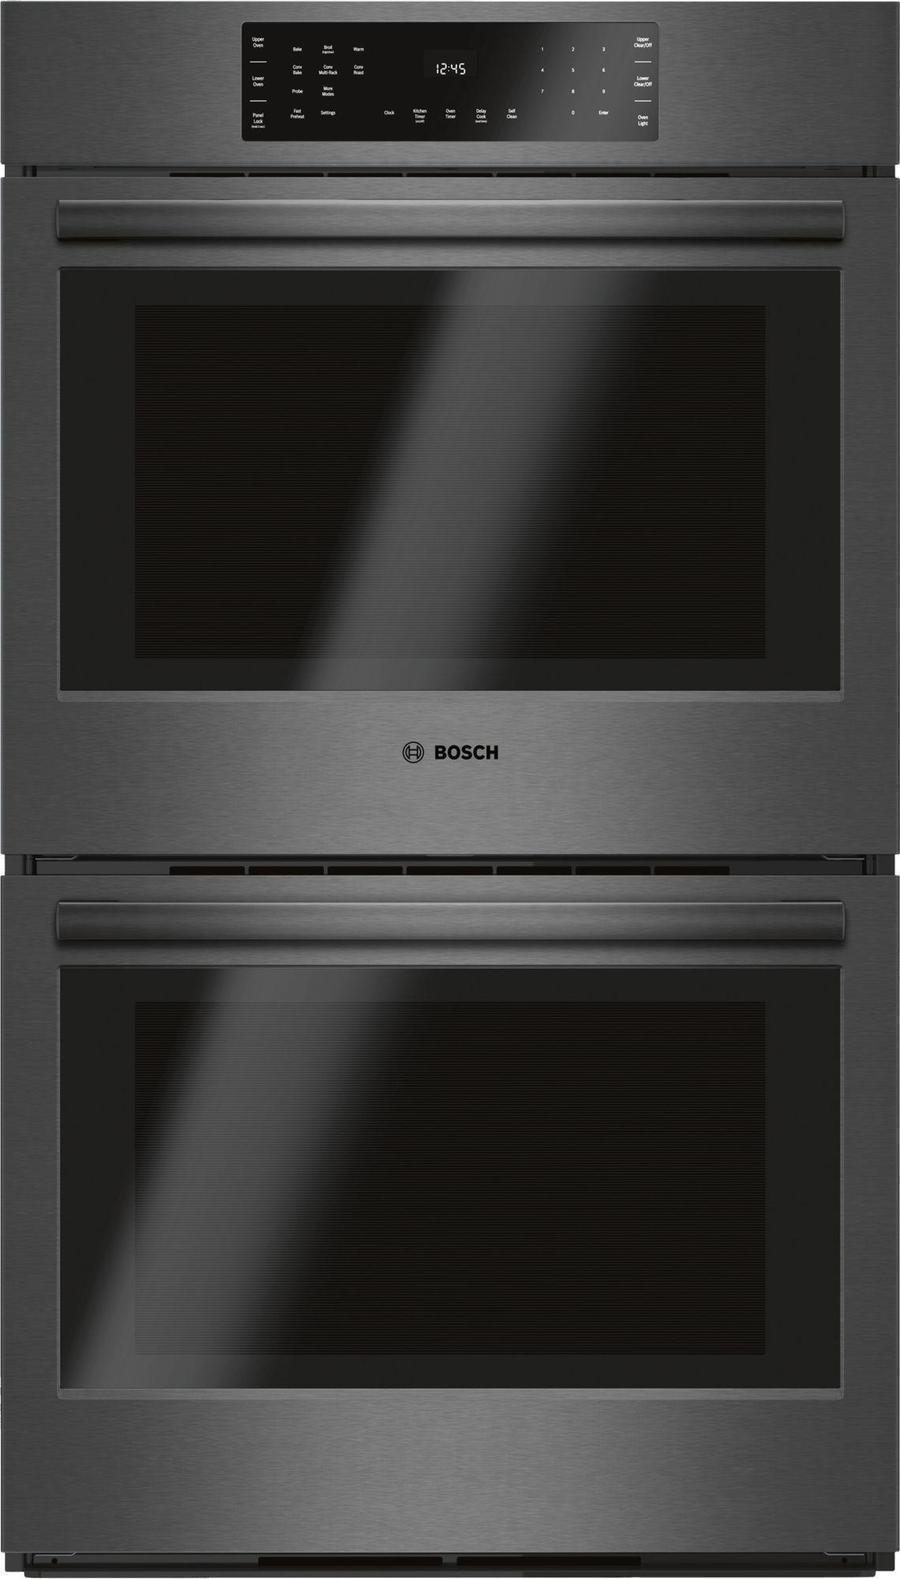 Bosch - 4.6 cu. ft Double Wall Oven in Black Stainless - HBL8642UC